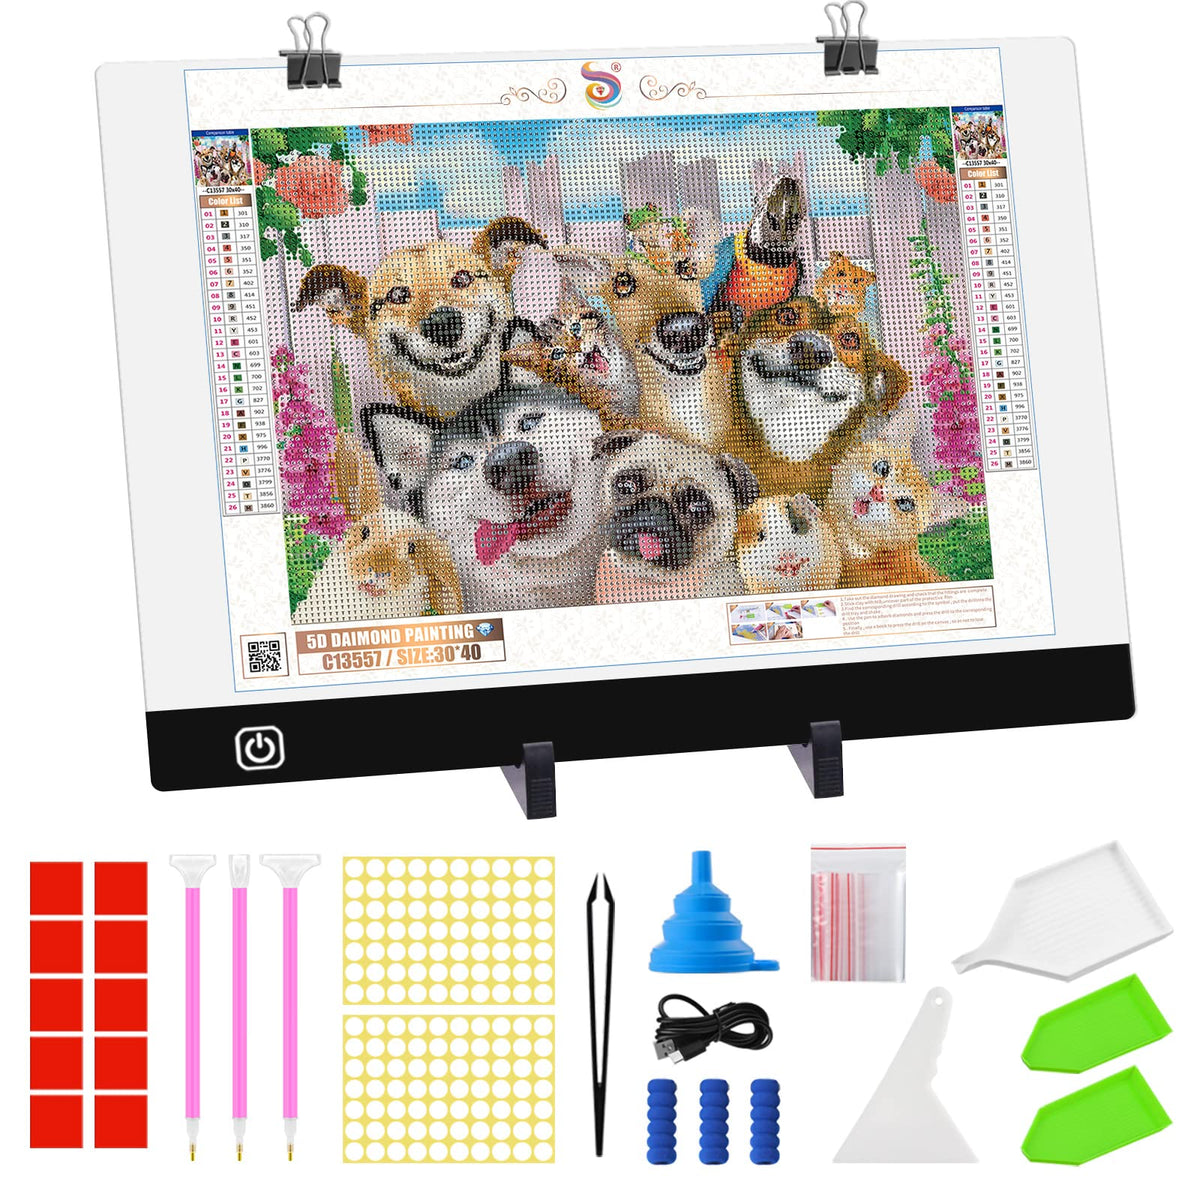 LIRUNQIU A3 Diamond Painting LED Light Pad Kit 5D Diamond Painting Accessories Tool Kit Full Drill for Adults and Kids Supplies Includes Storage Case